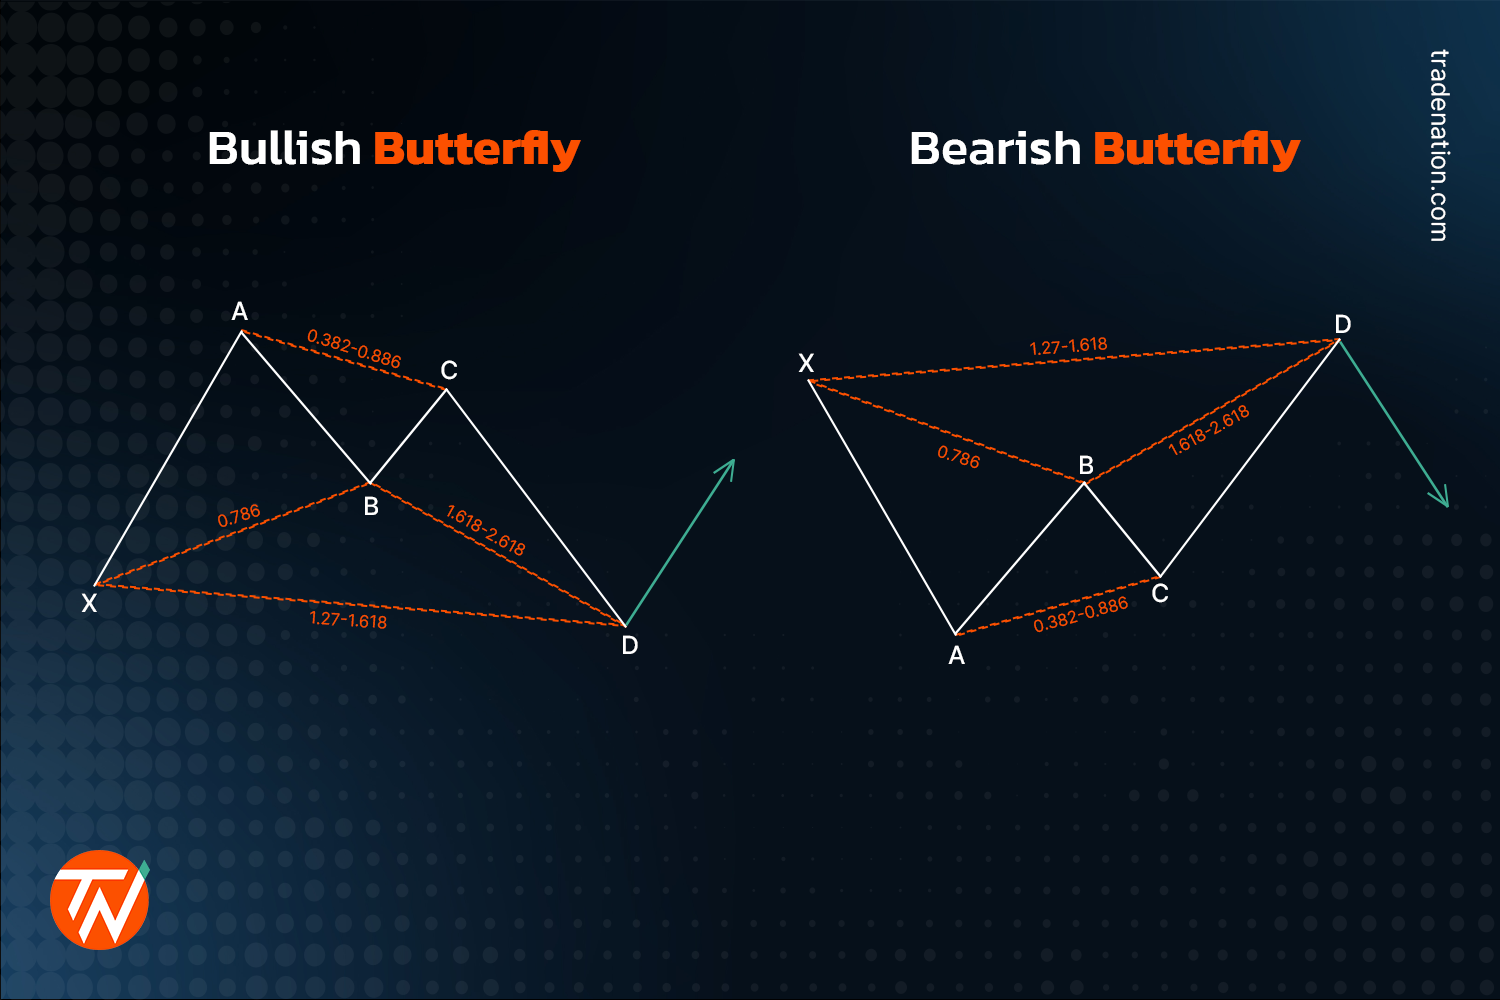 Bullish butterfly and bearish butterfly demonstrated